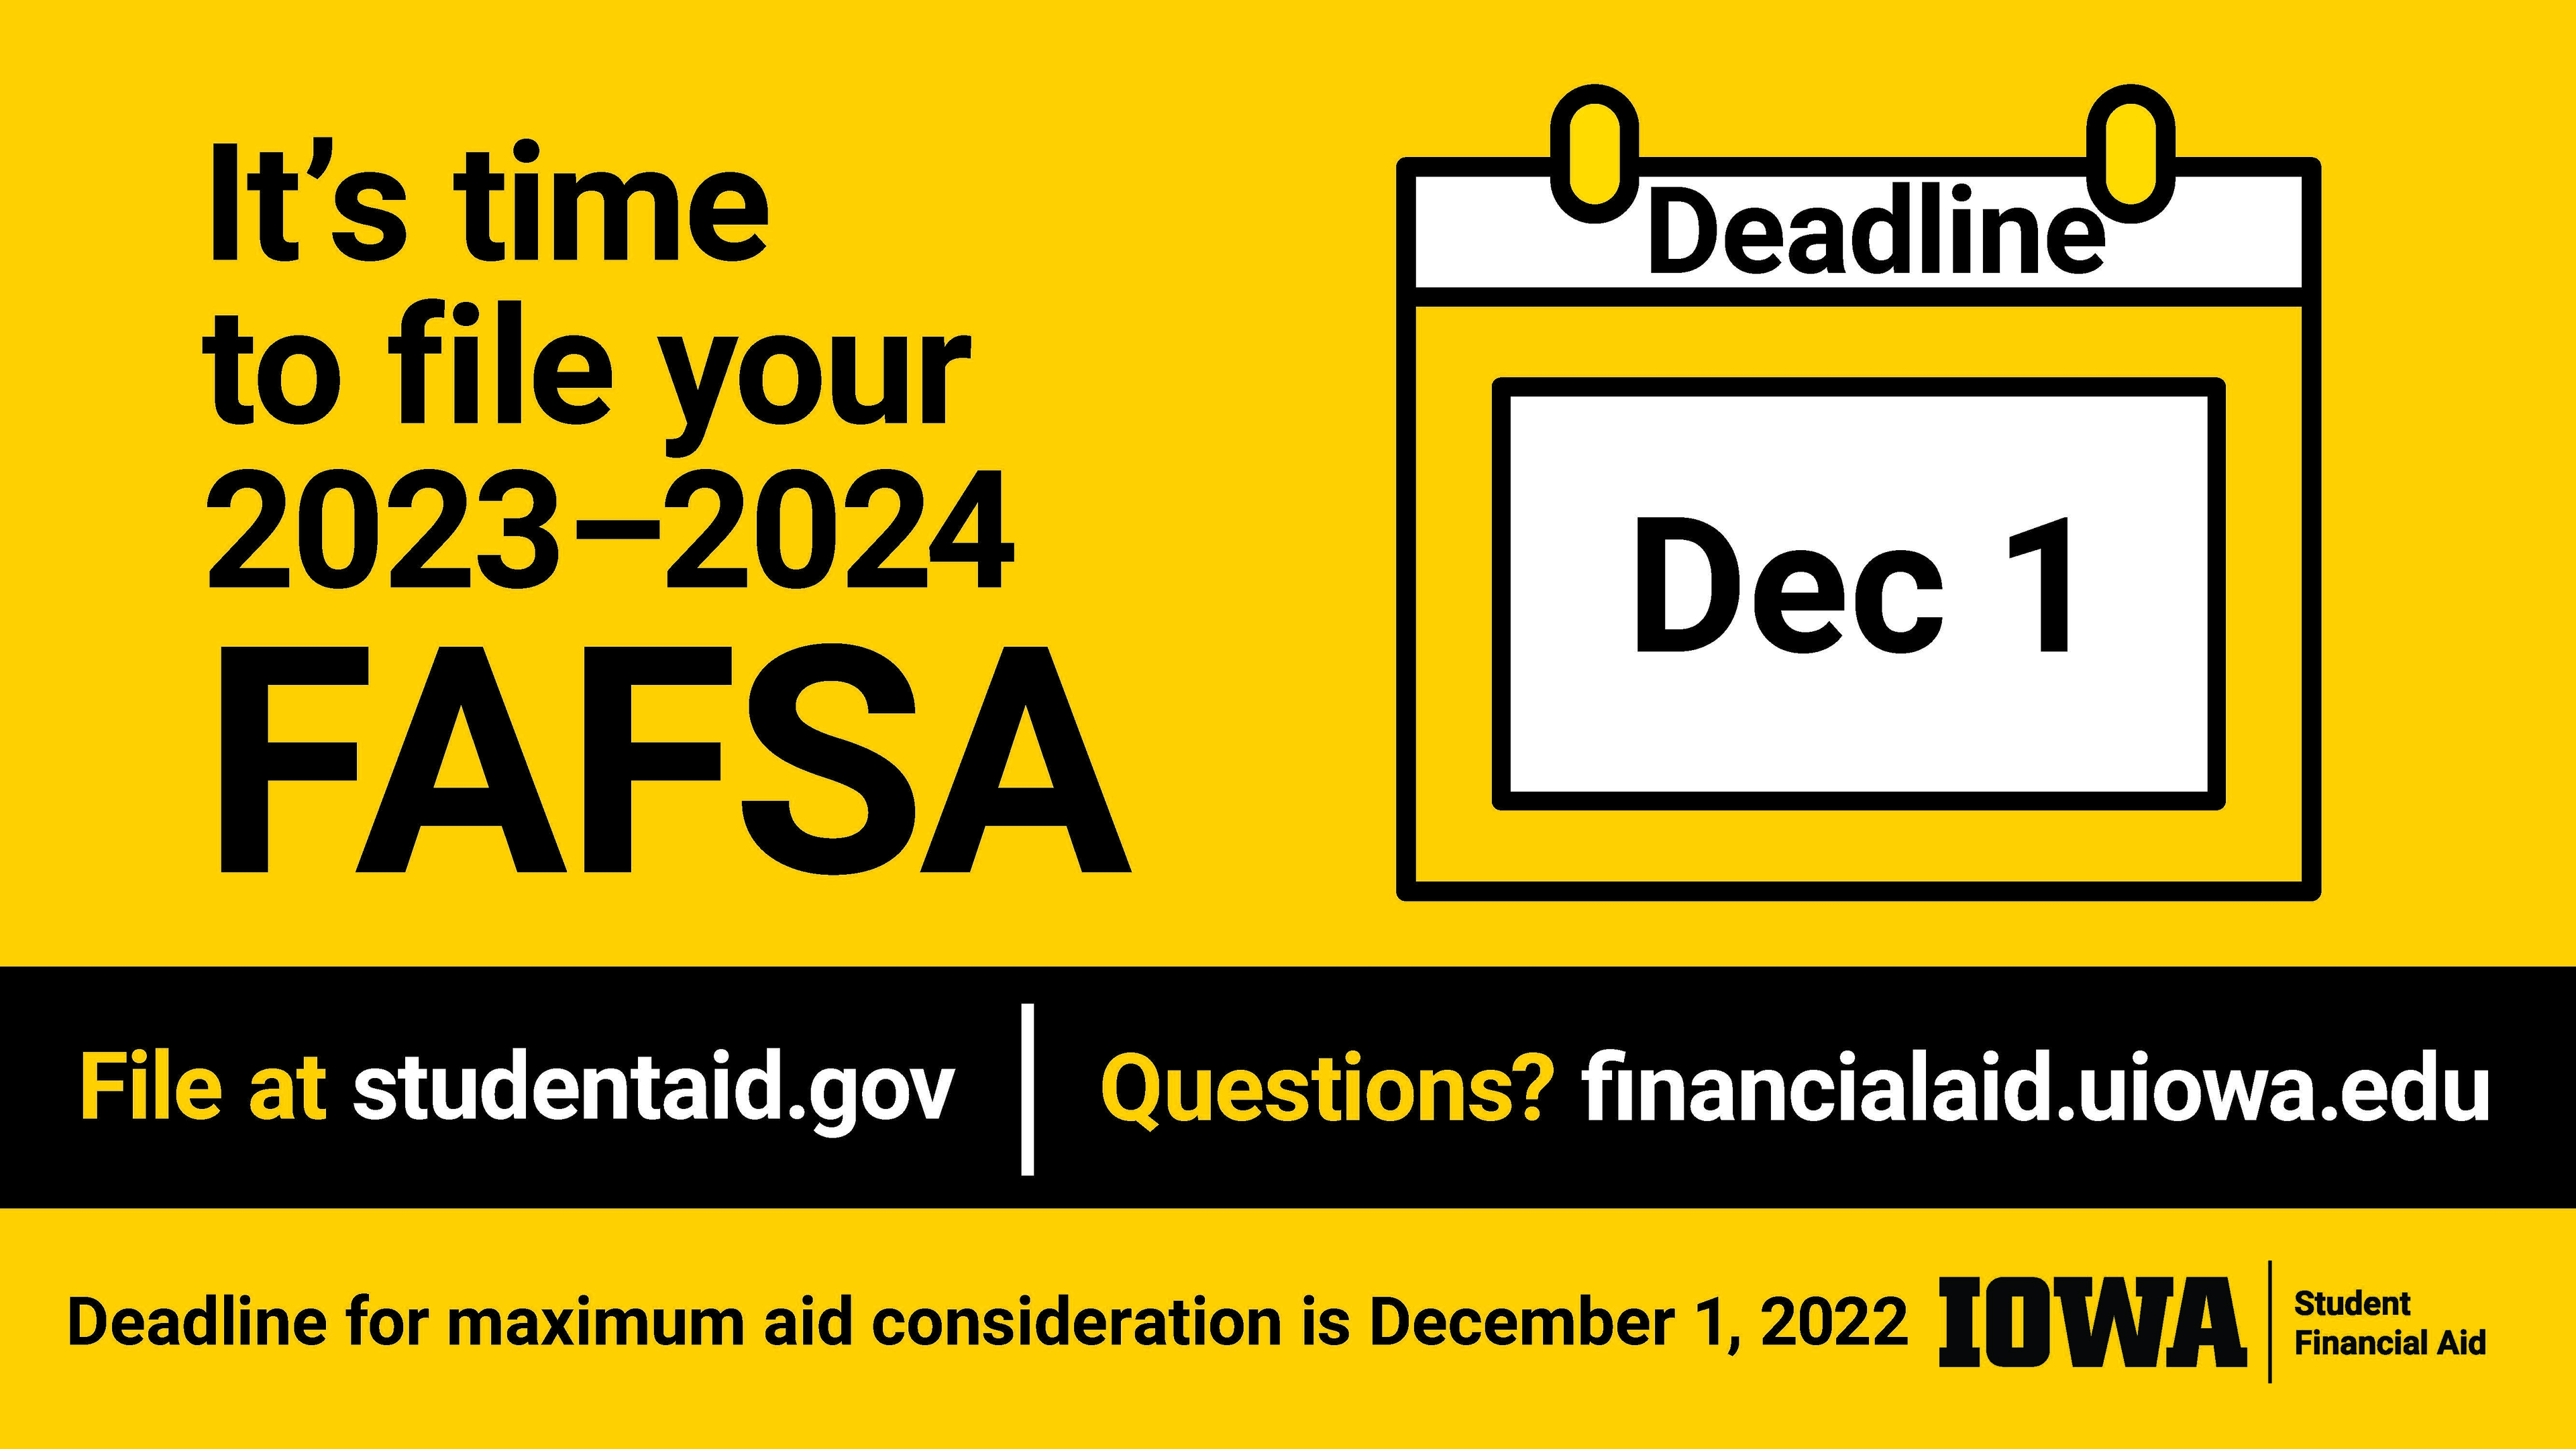 File your FAFSA at studentaid.gov for the 2023-24 academic year